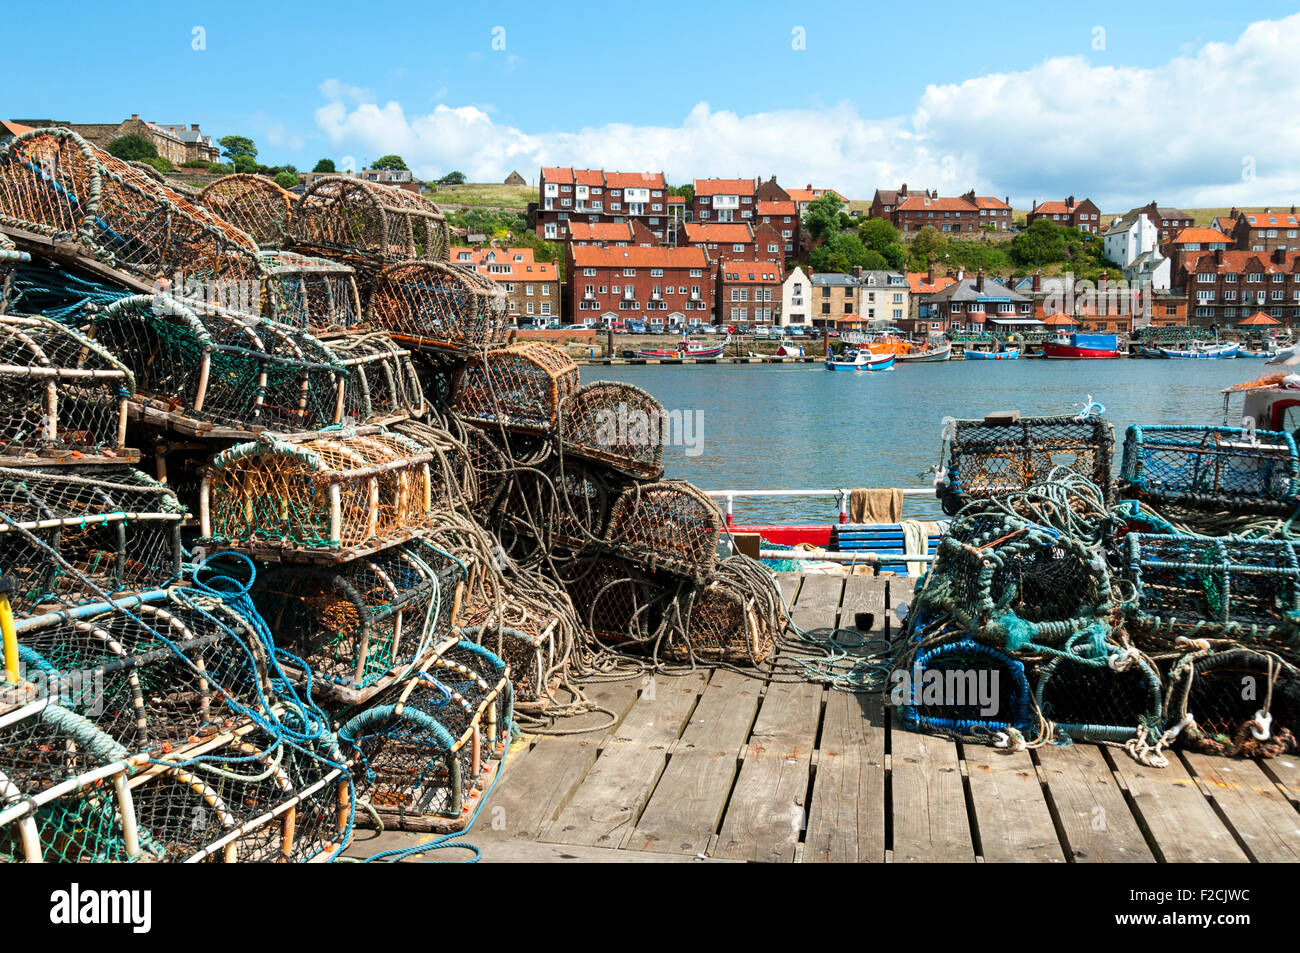 Lobster creels at the harbour, Whitby, Yorkshire, England, UK Stock Photo